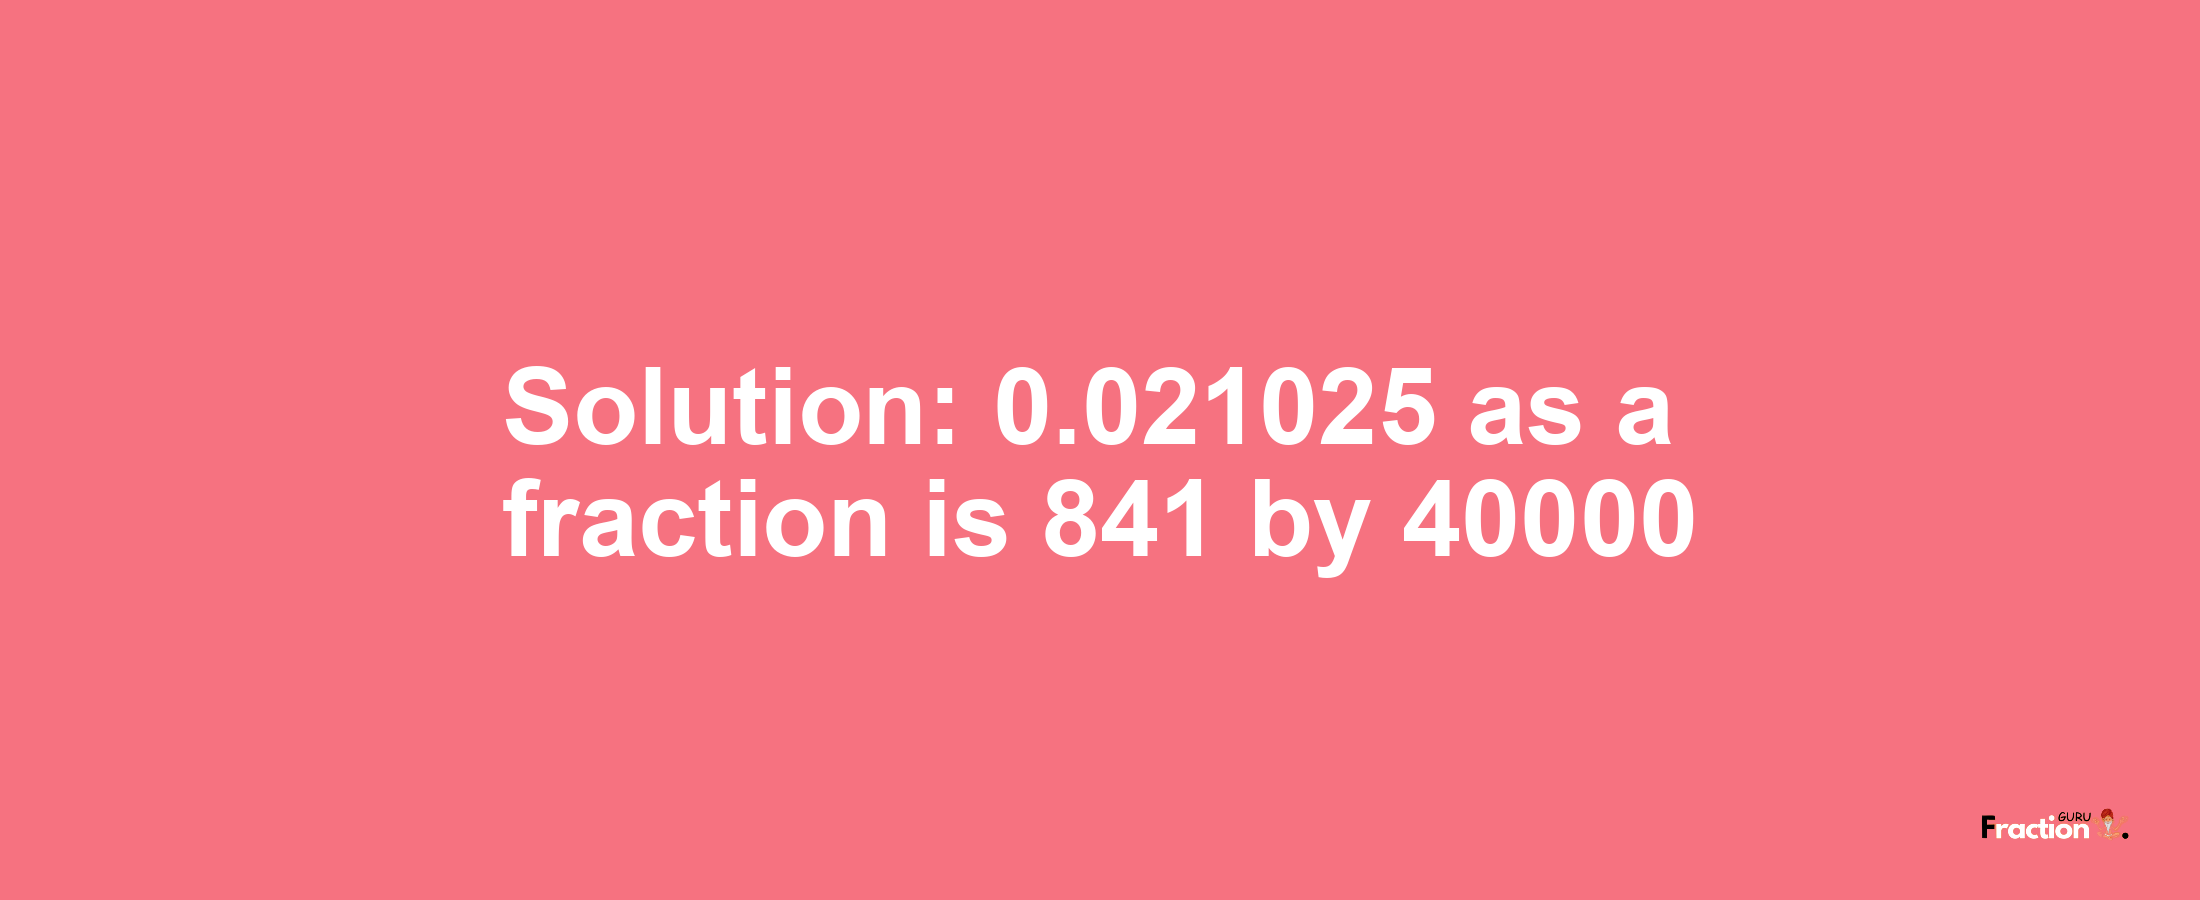 Solution:0.021025 as a fraction is 841/40000